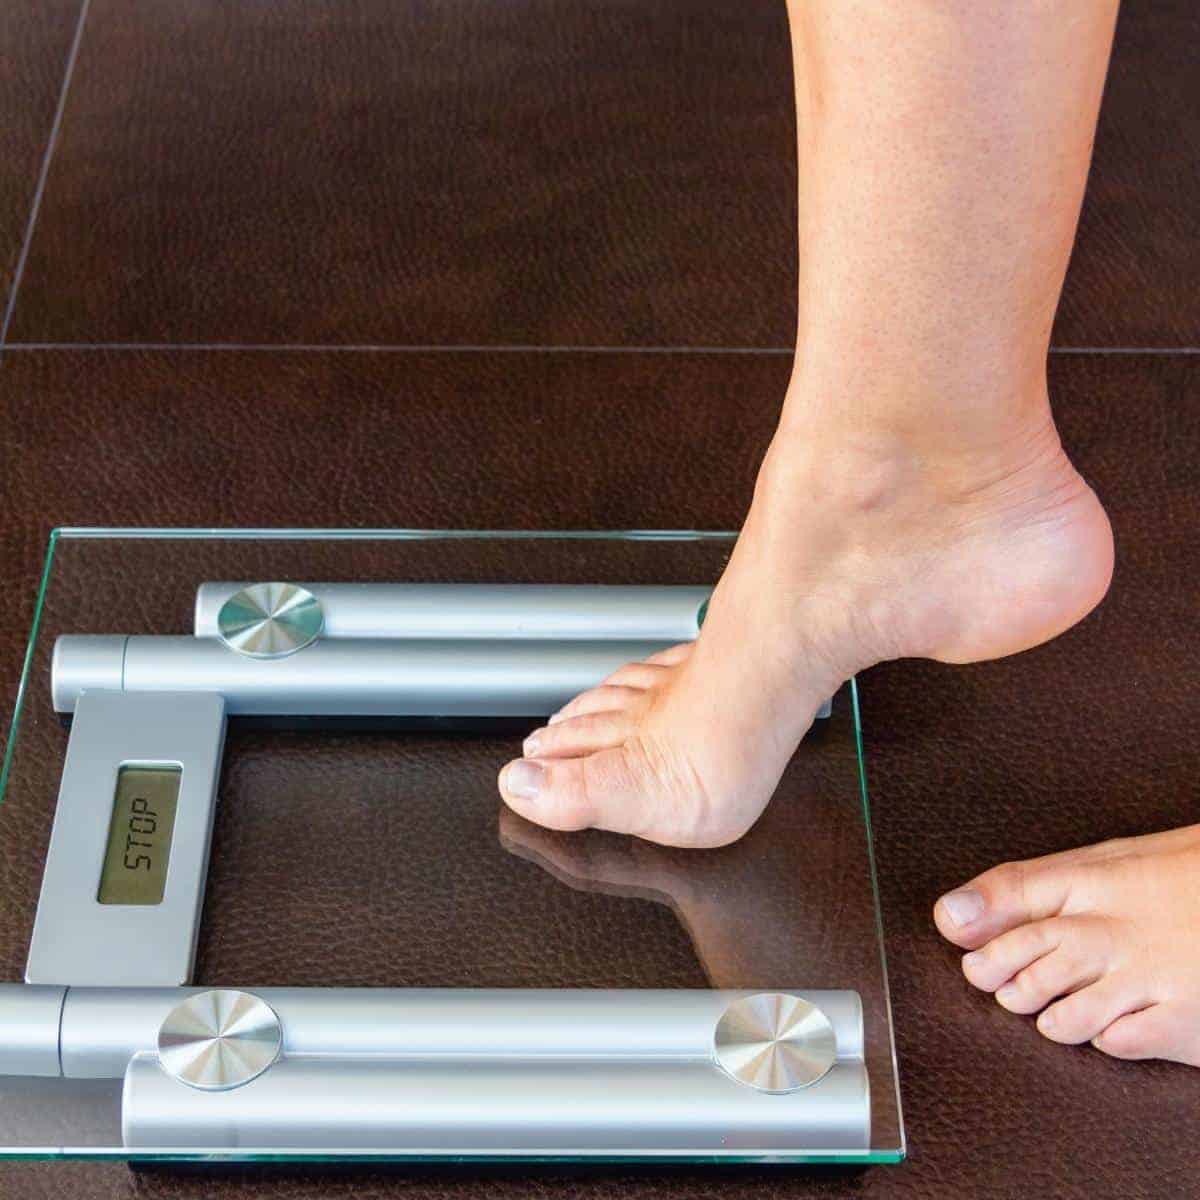 15 Things to do when the scales show a gain